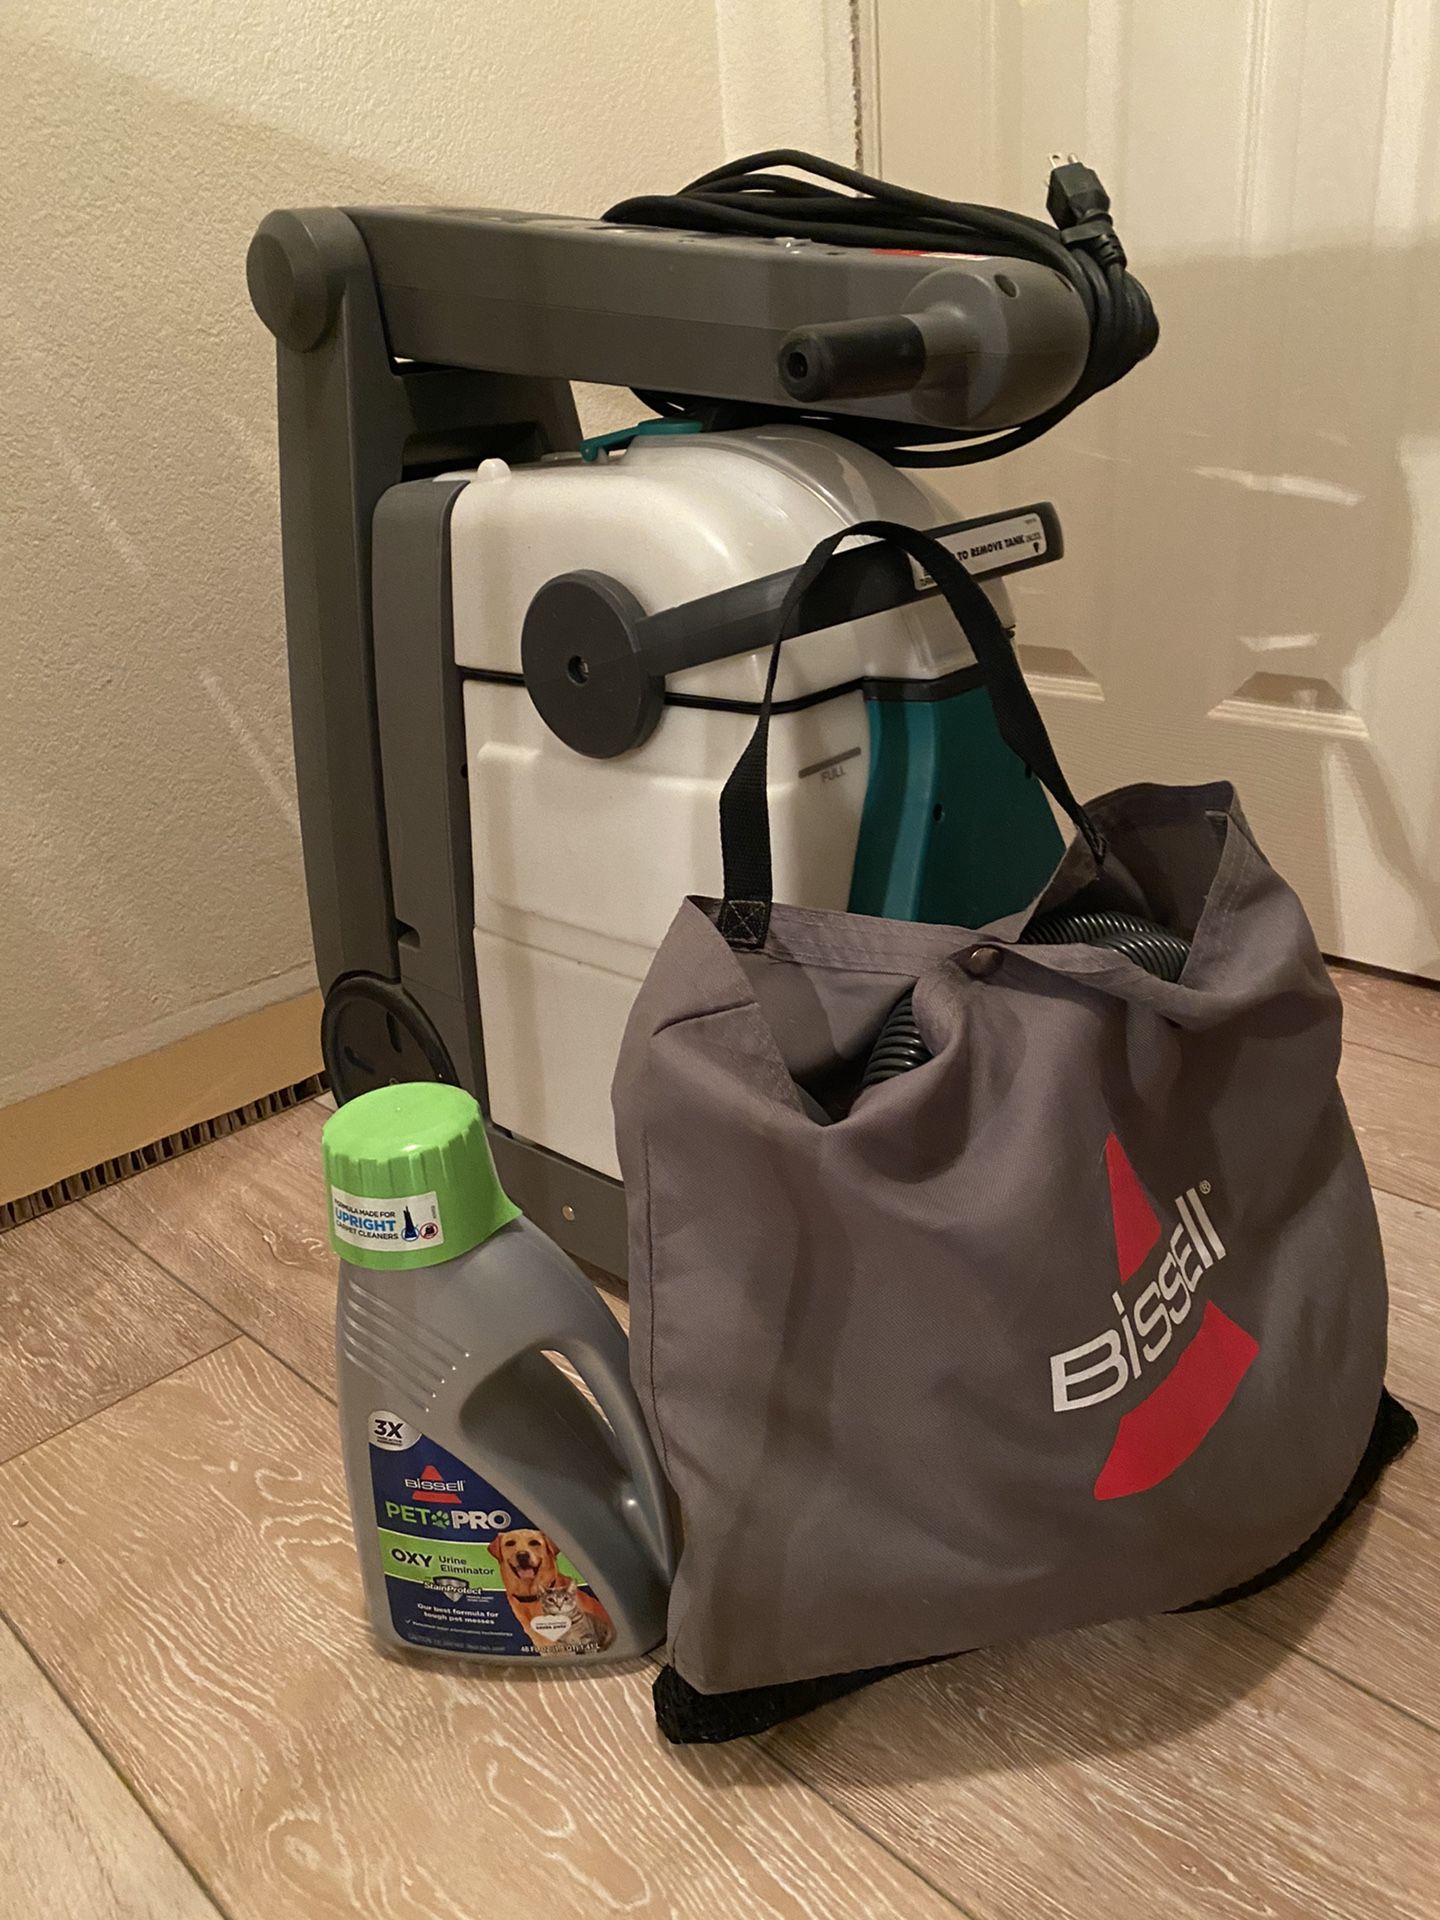 Bissell - Big green Carpet Cleaning Machine 